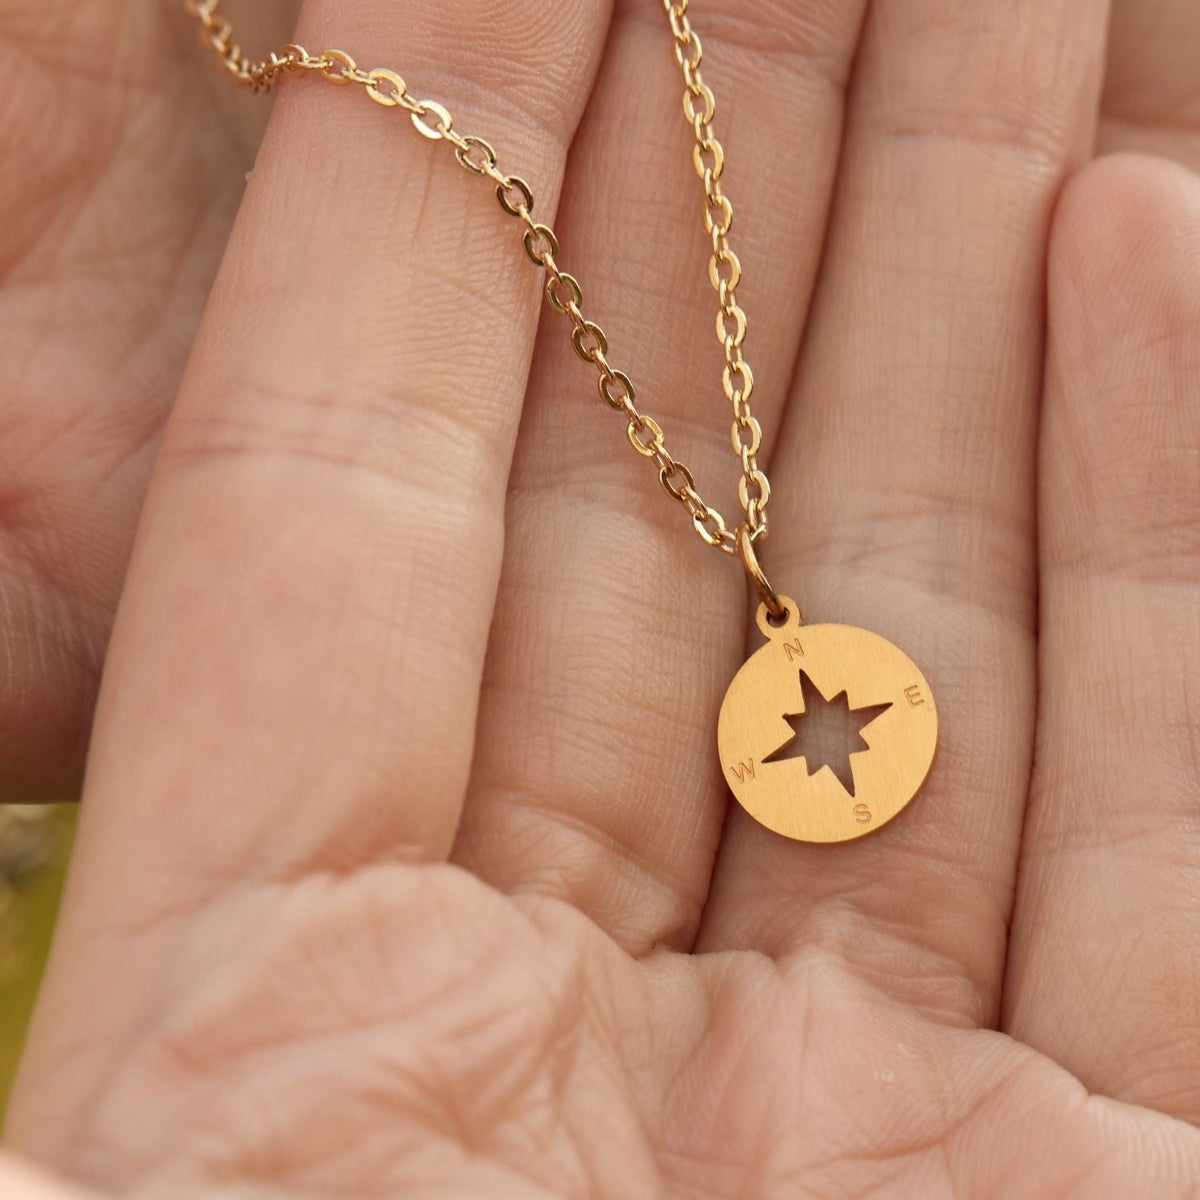 In Memory of Your Amazing Son | Sympathy Gift | Compass Necklace